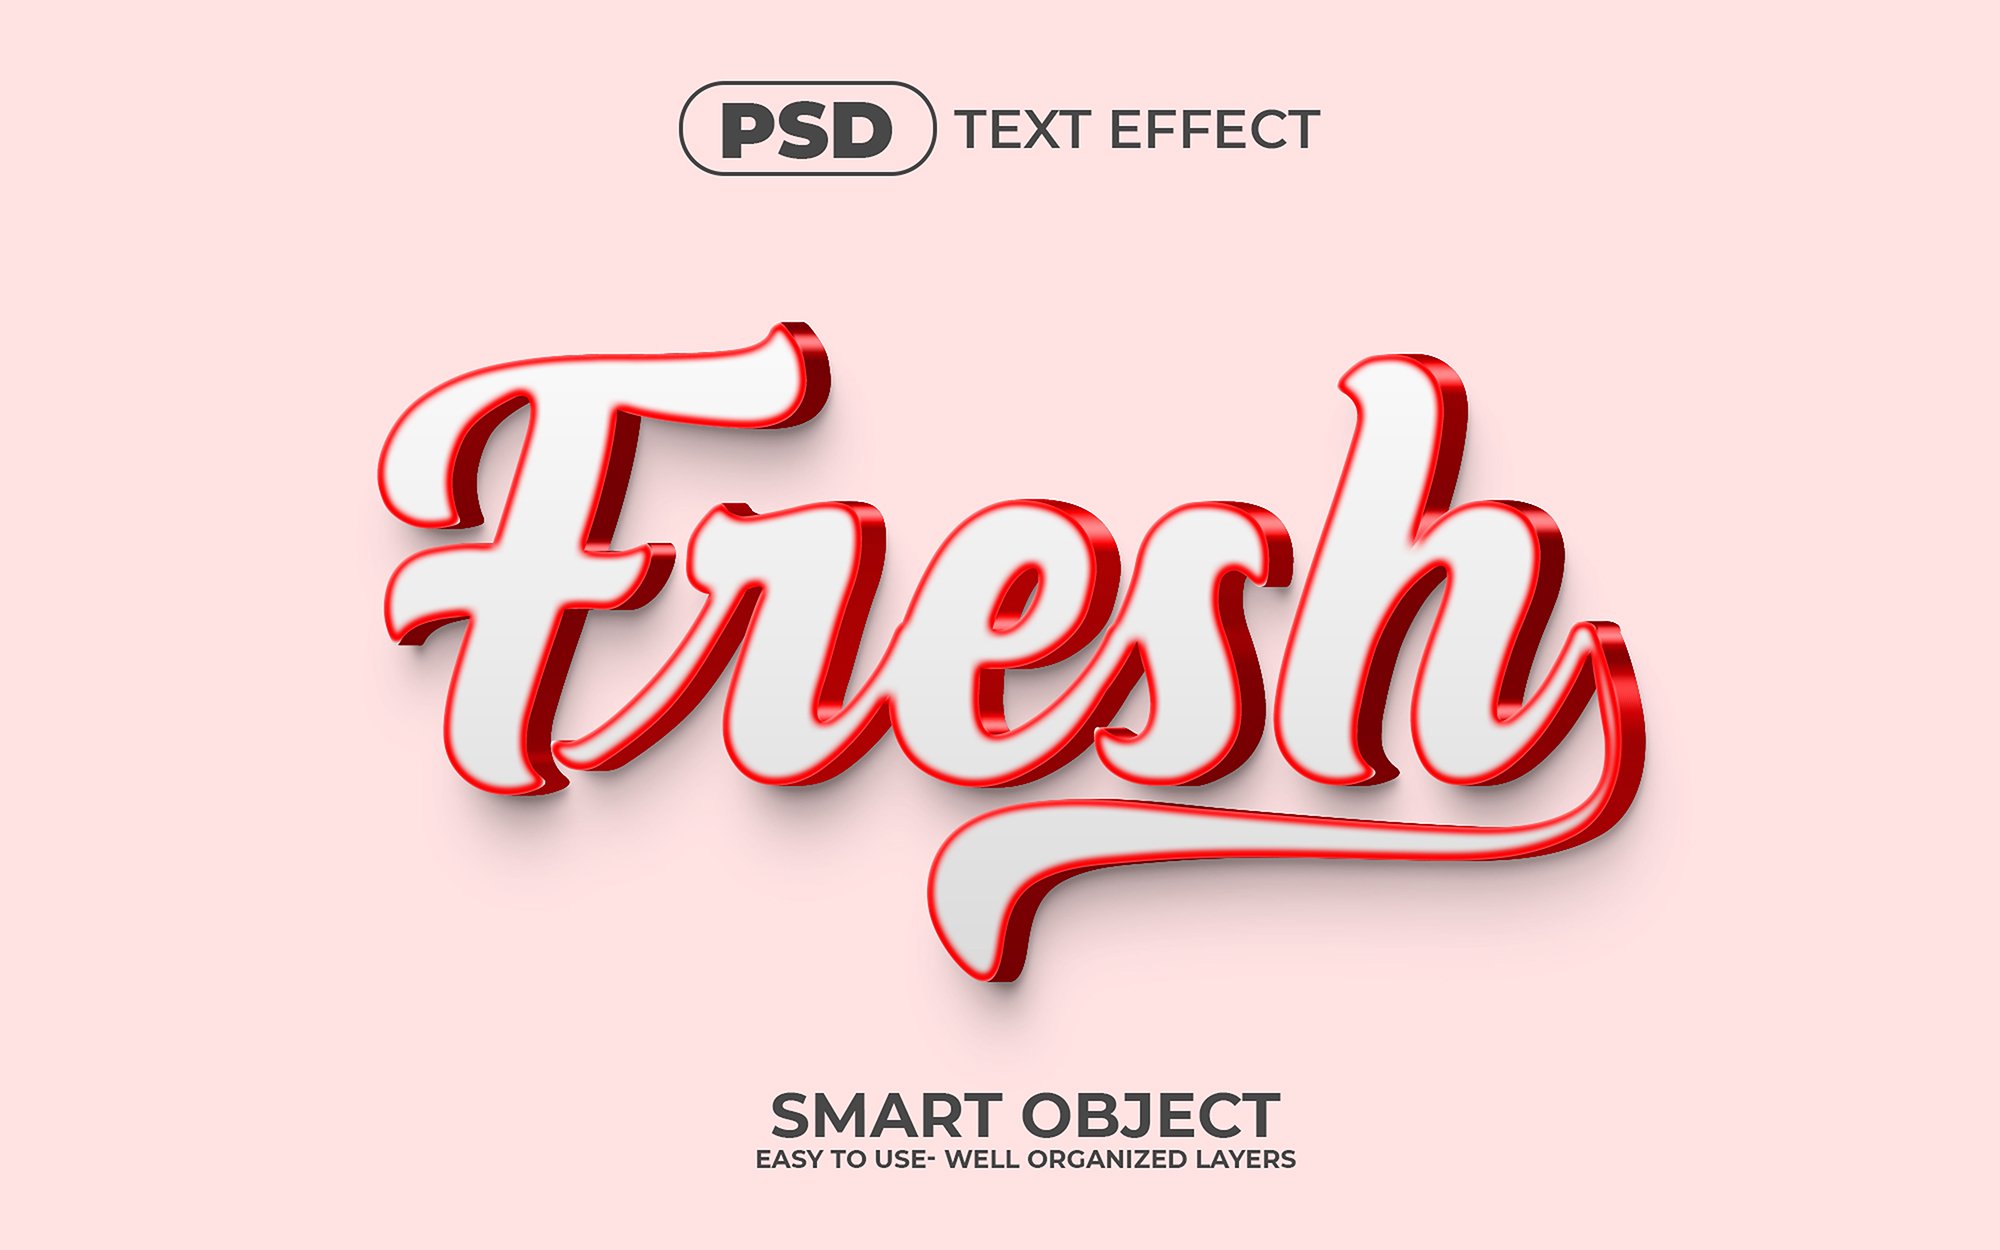 Fresh 3d Editable Text Effect Stylecover image.